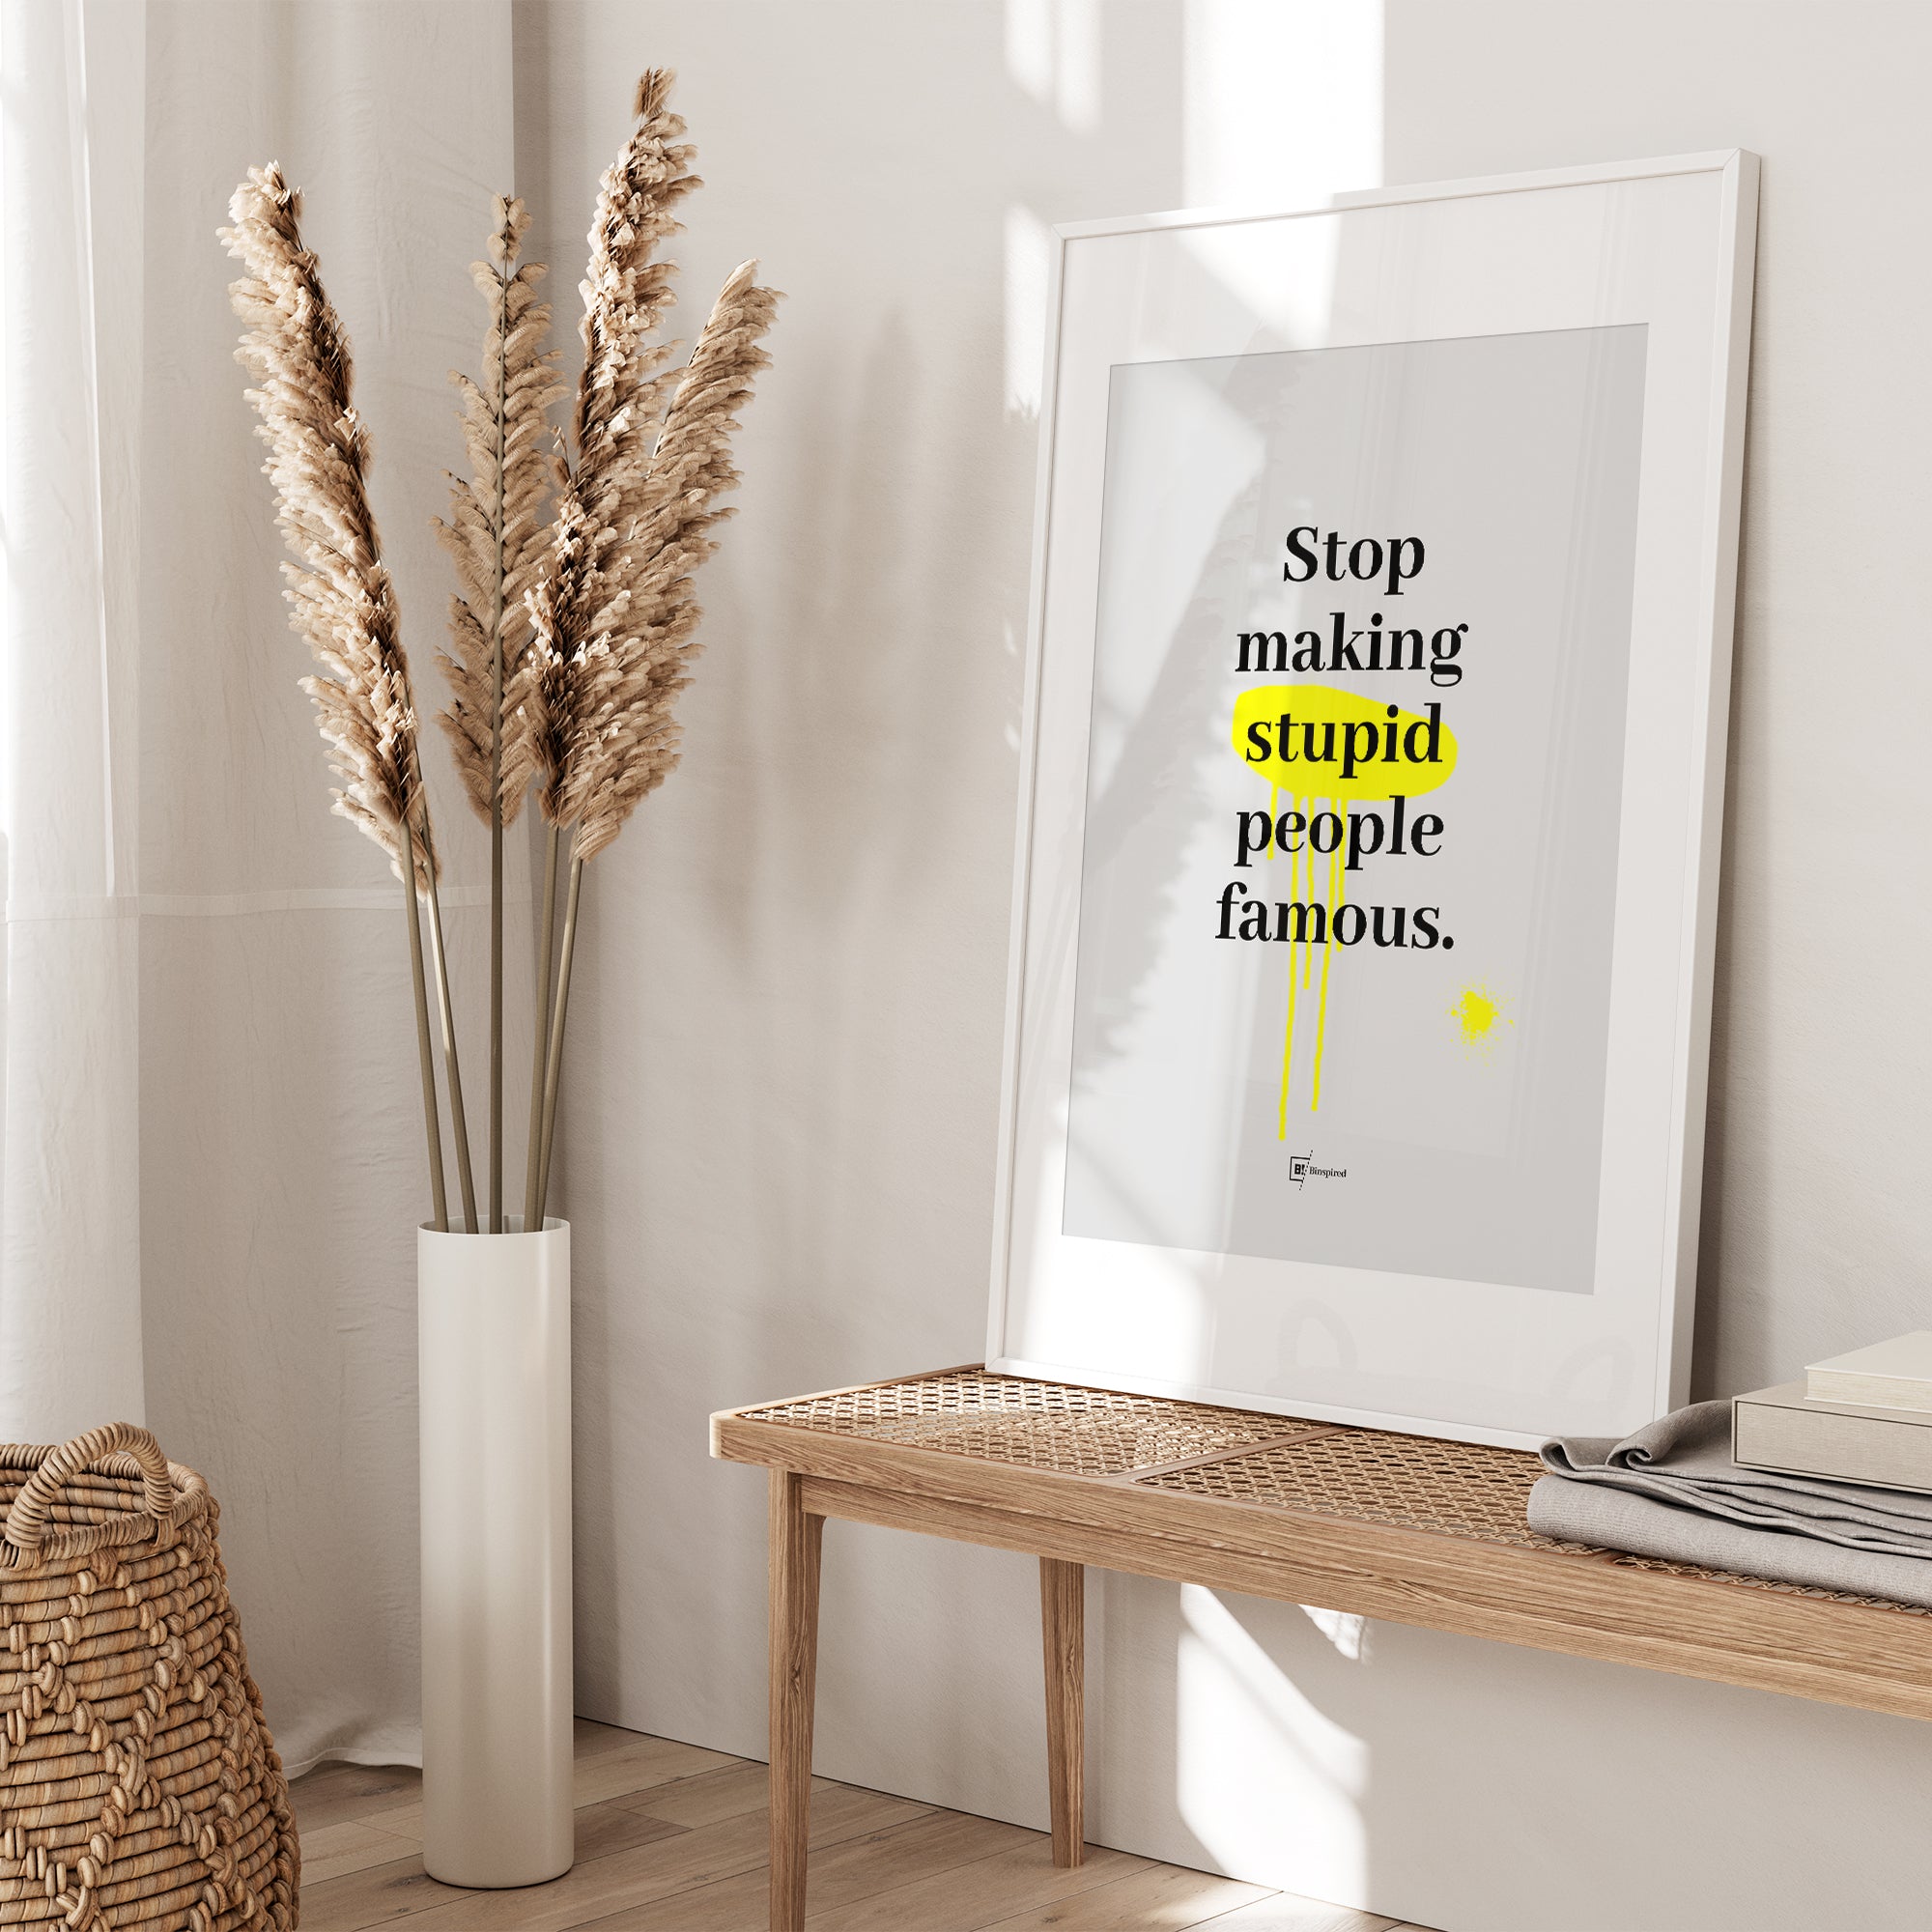 Be inspired by our "Stop making stupid people famous" quote art print! This artwork was printed using the giclée process on archival acid-free paper and is presented in a white frame with passe-partout that captures its timeless beauty in every detail.